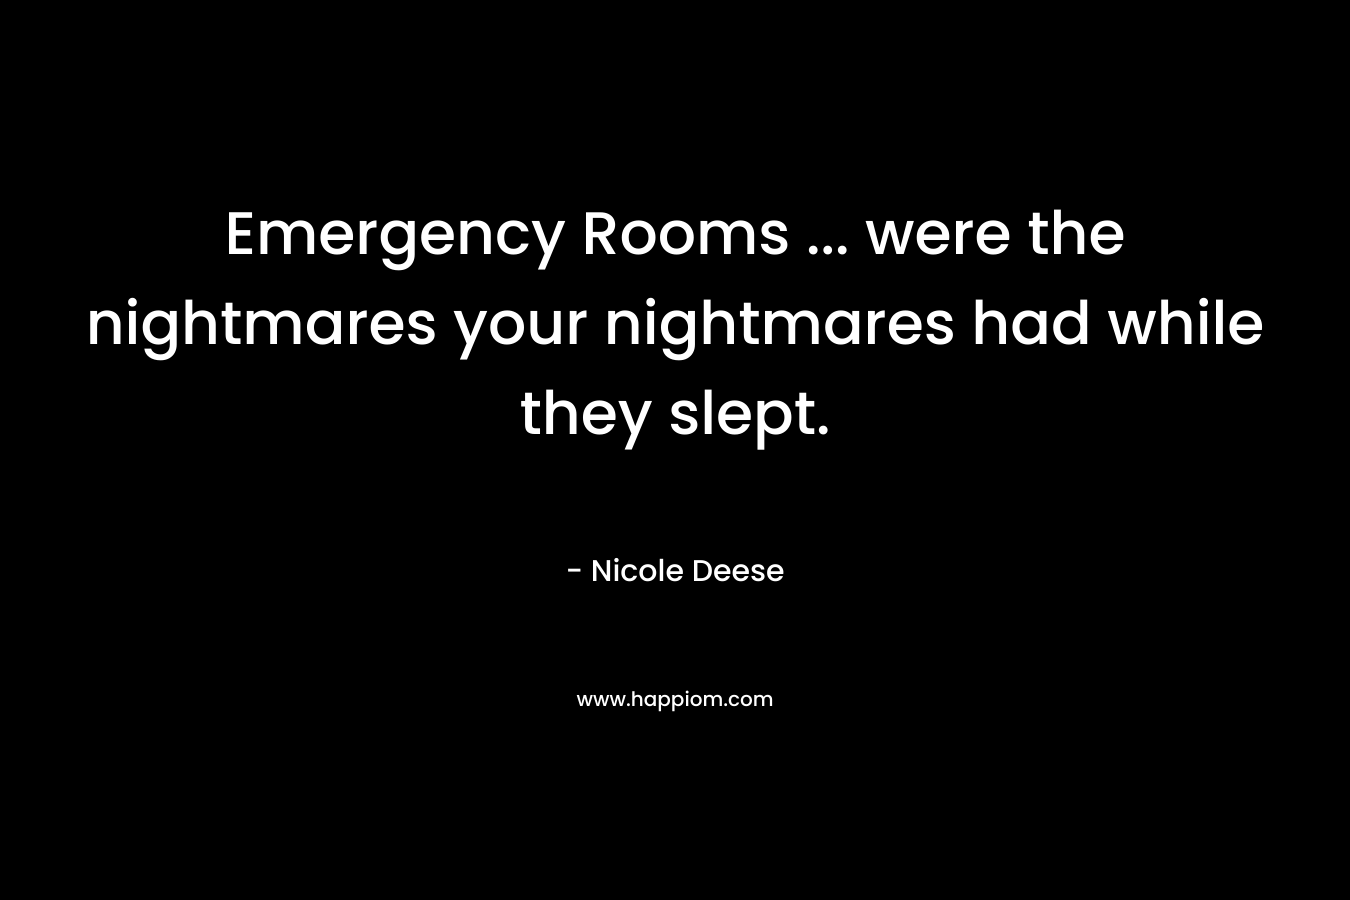 Emergency Rooms ... were the nightmares your nightmares had while they slept.